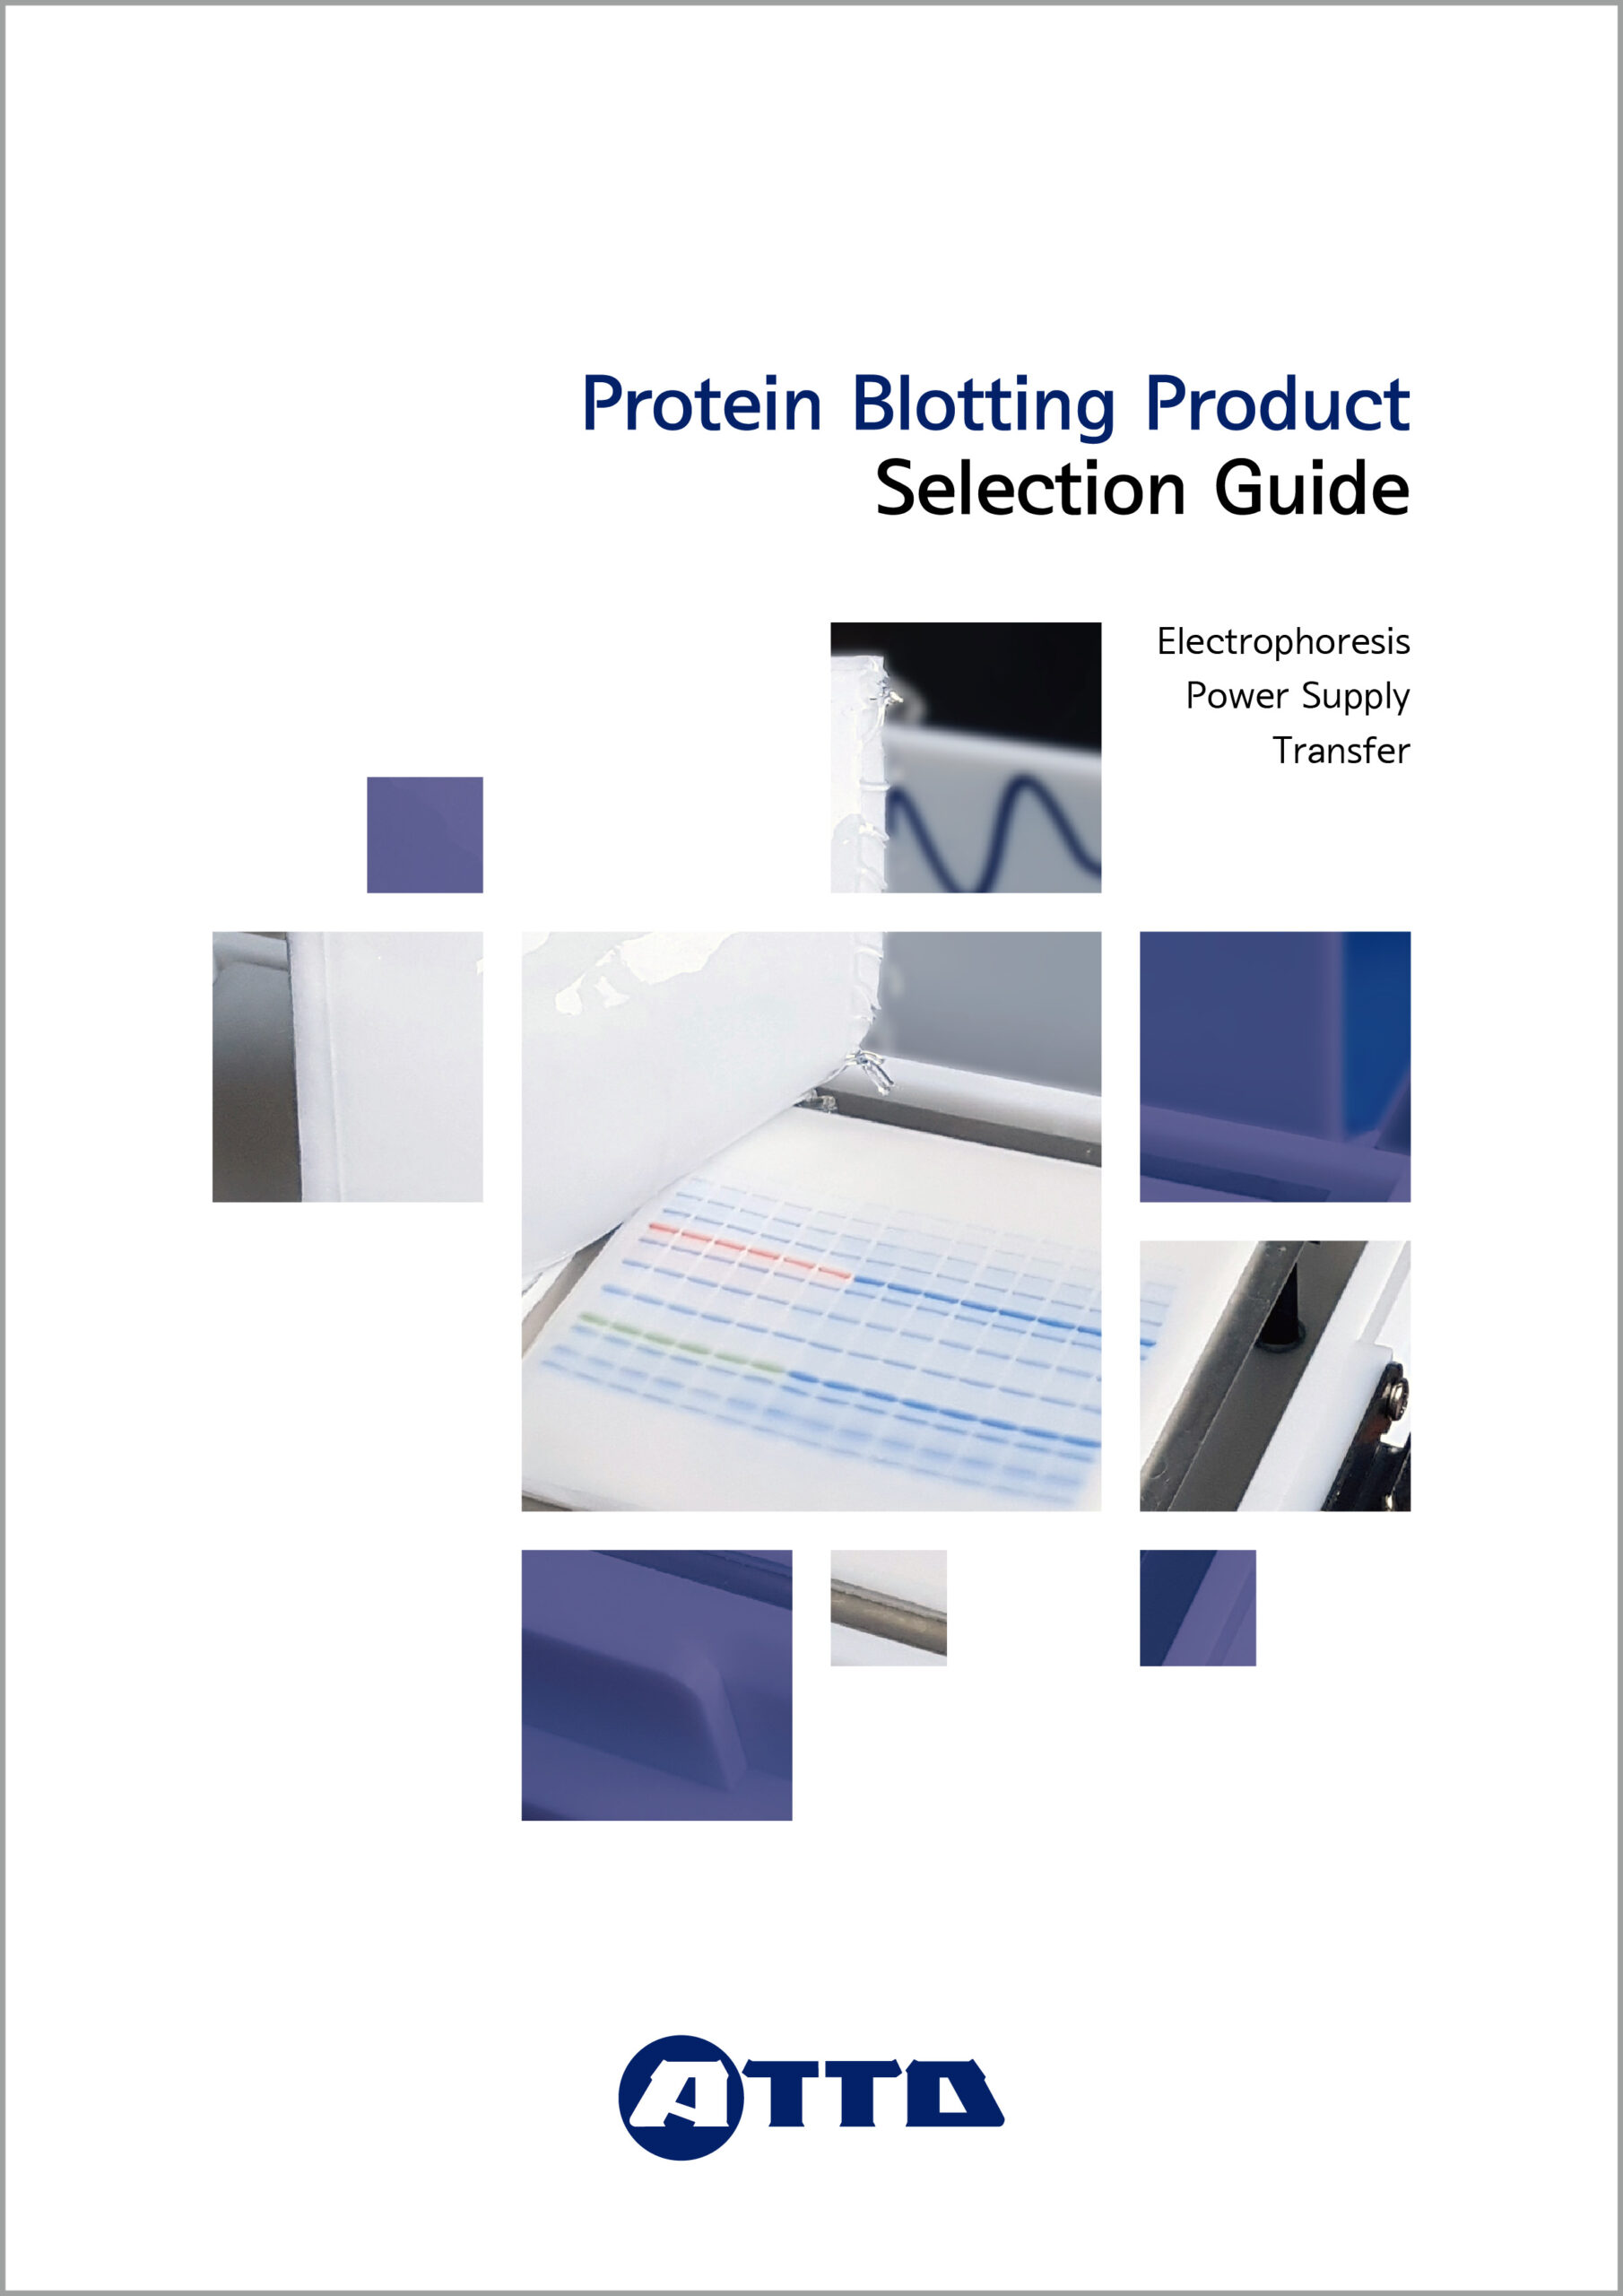 Protein Blotting Products